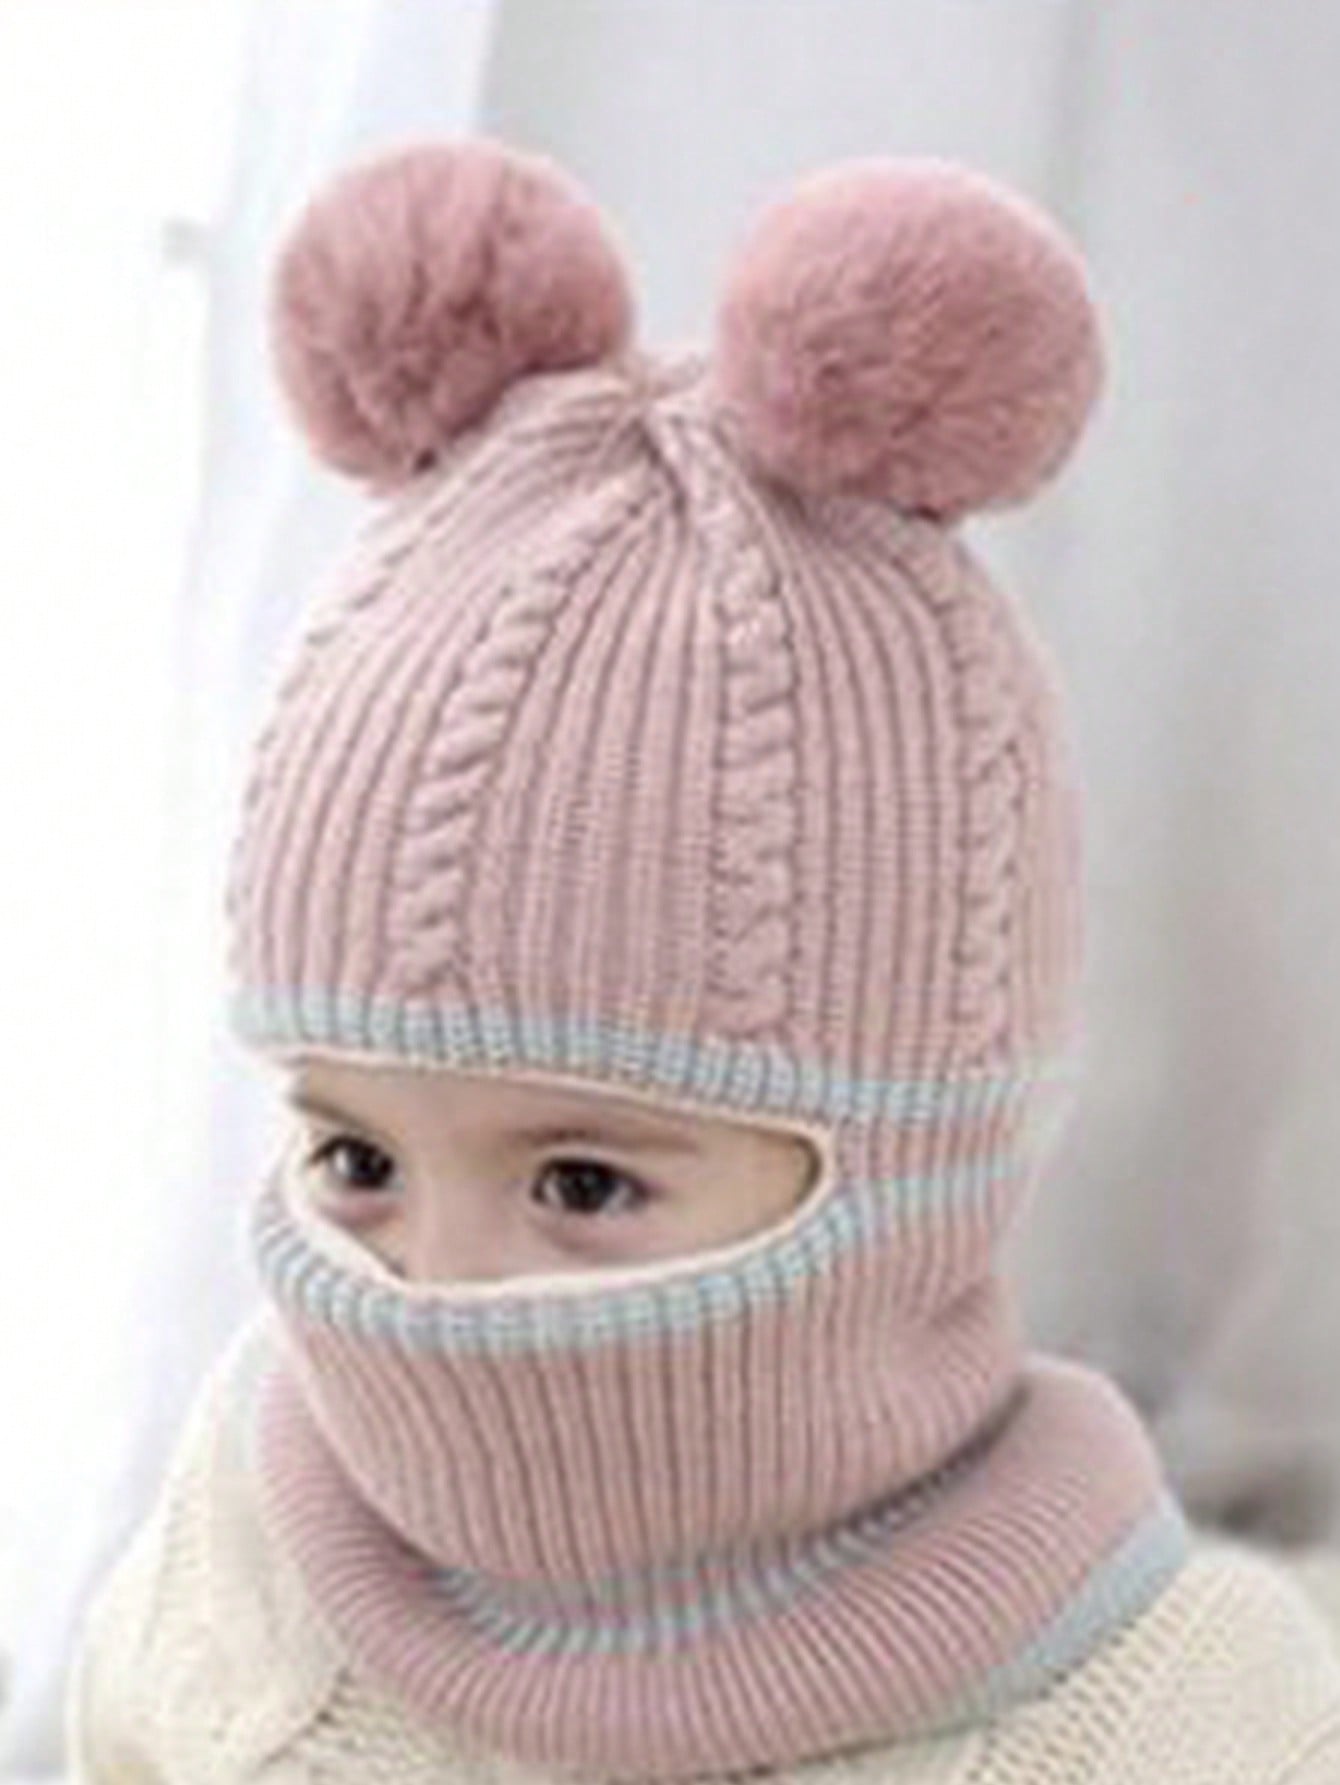 1pc Children's Winter Balaclava Hat With Dual Pom Poms, Windproof And Thermal